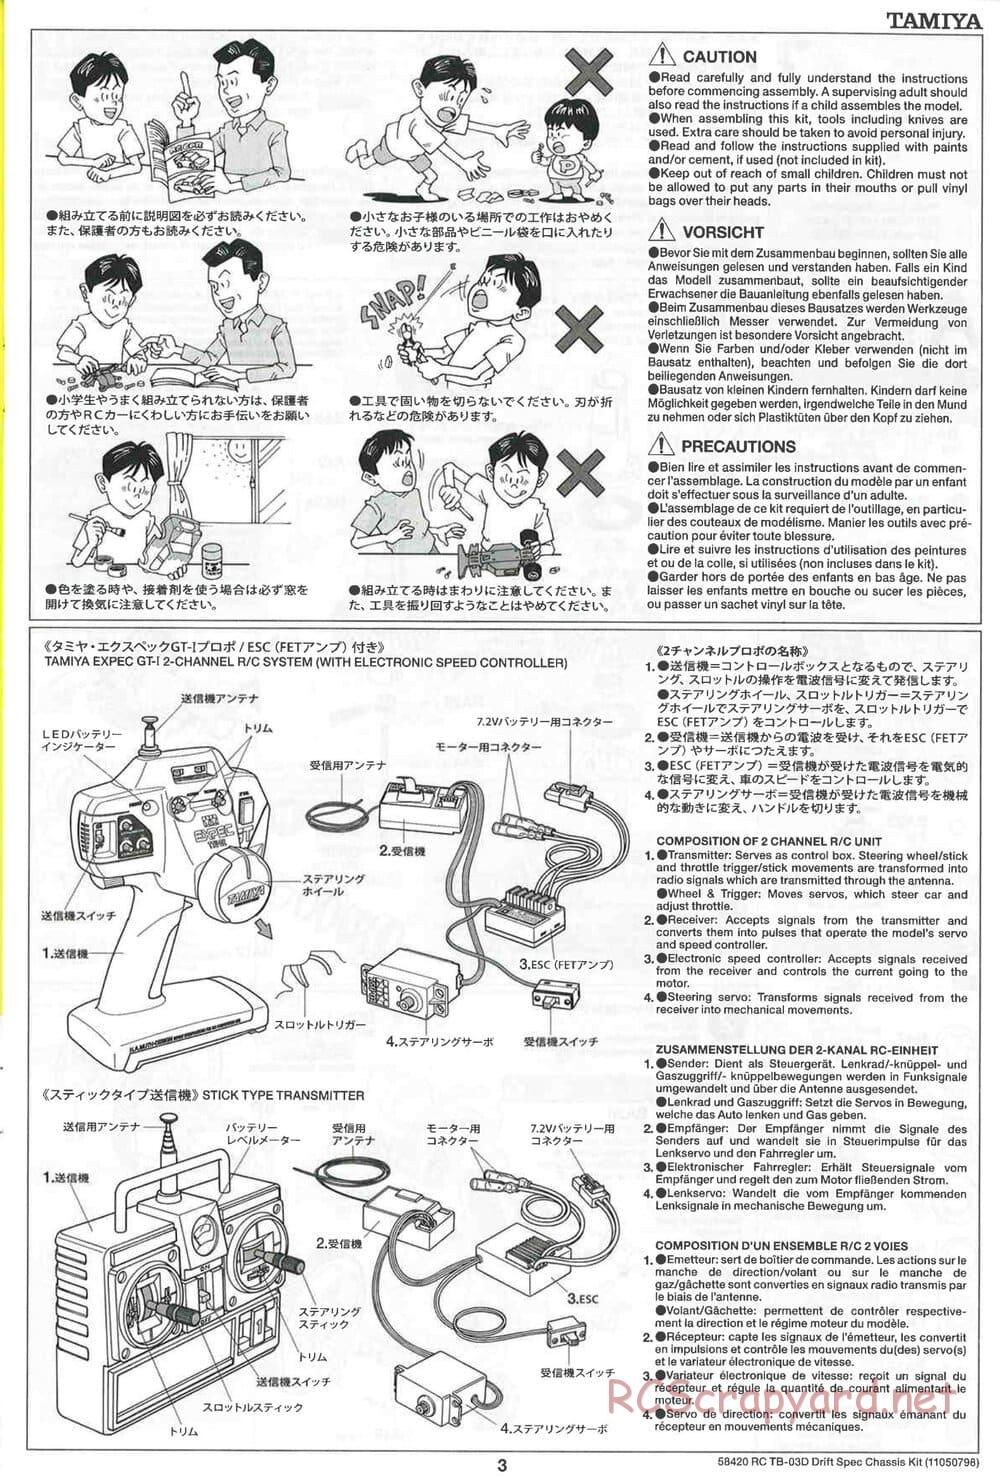 Tamiya - TB-03D HP Drift Spec Chassis - Manual - Page 3